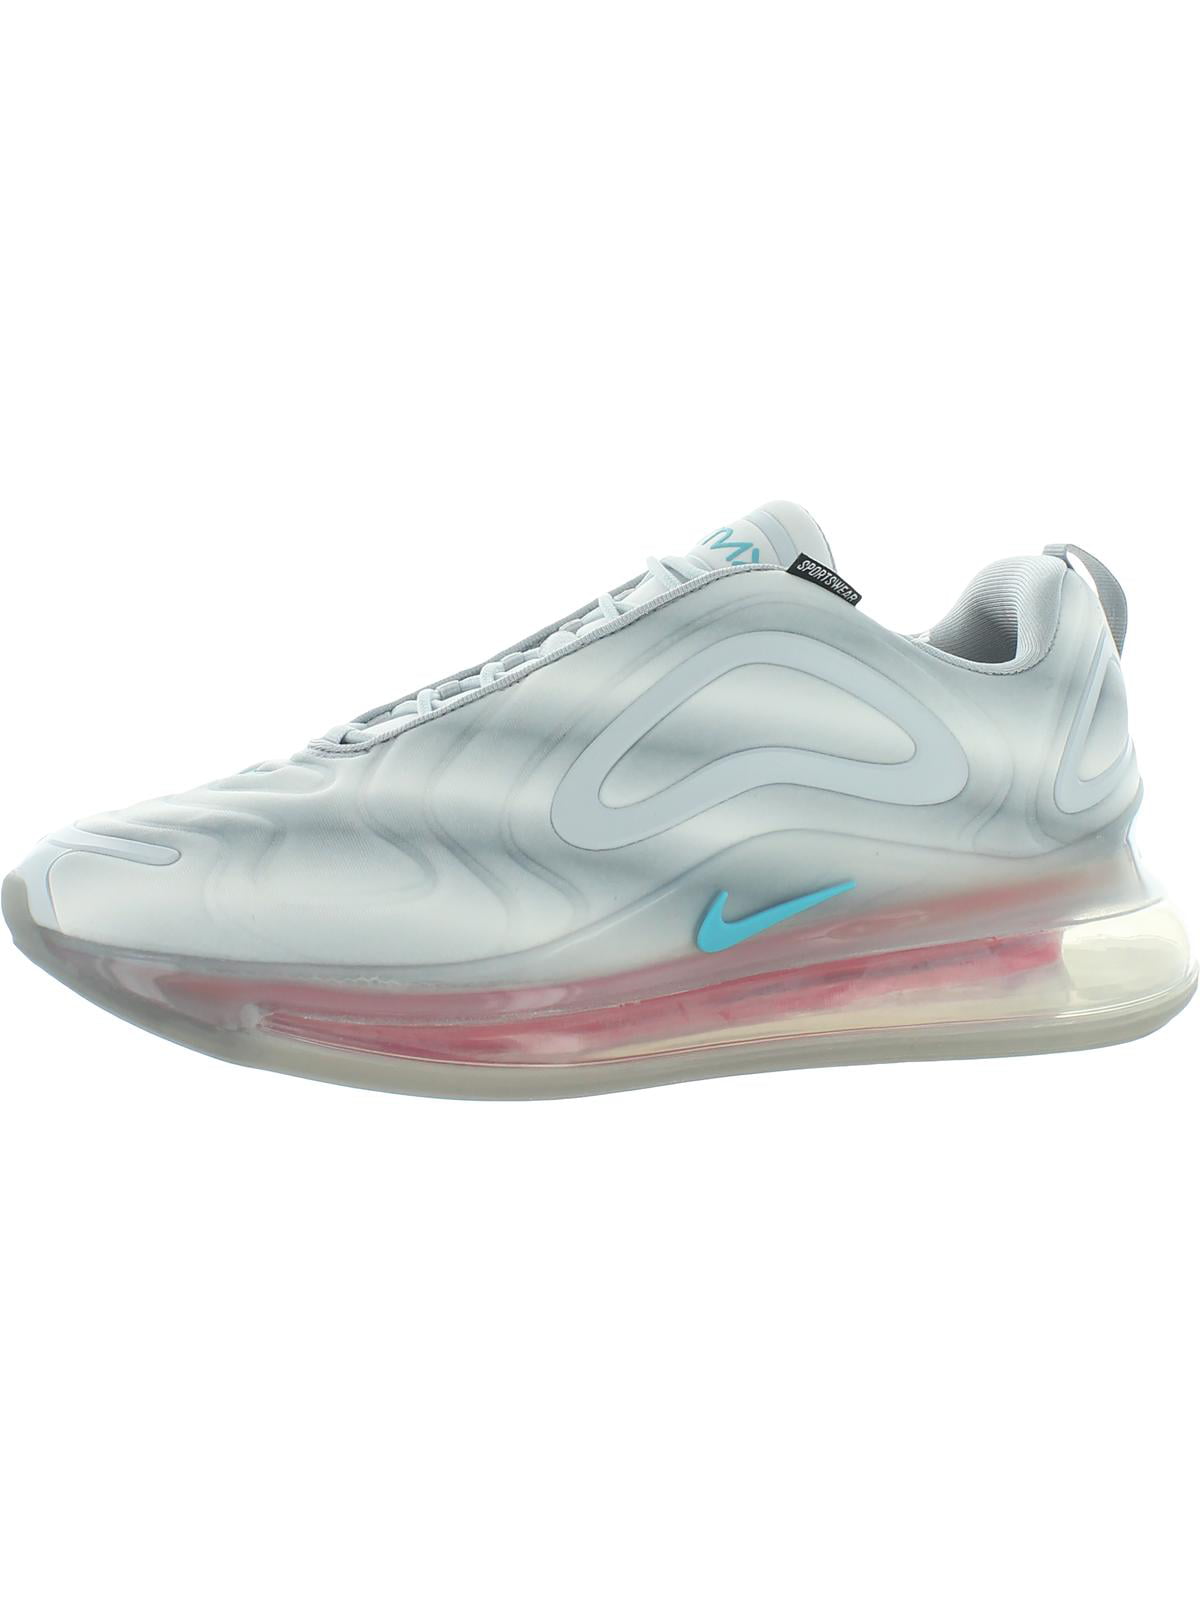 label germ Passerby Nike Mens Air Max 720 Trainers Sneakers Running Shoes Gray 10.5 Medium (D)  - Walmart.com